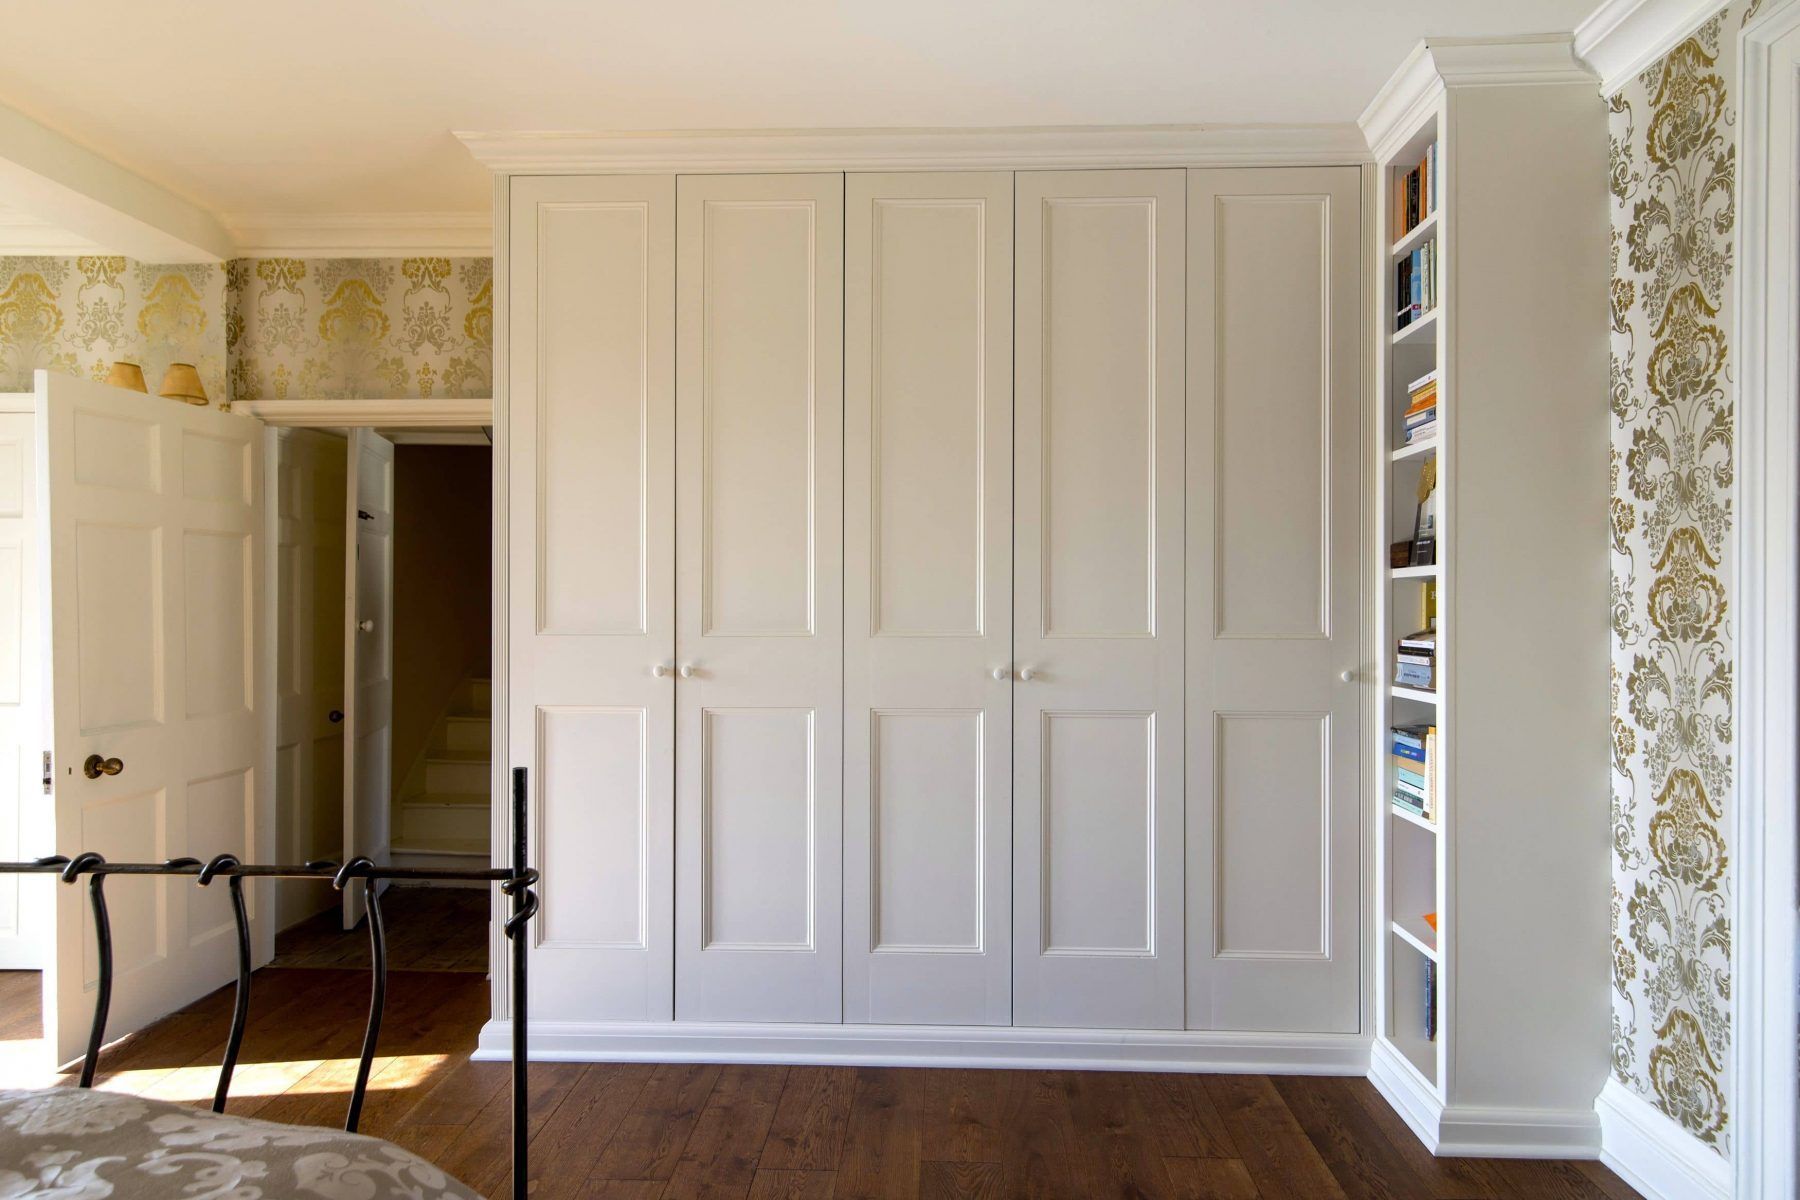 Image Result For Building Fitted Wardrobes Traditional Doors | Fitted  Wardrobes, Bespoke Wardrobe, Built In Wardrobe With Regard To Traditional Wardrobes (Photo 1 of 15)